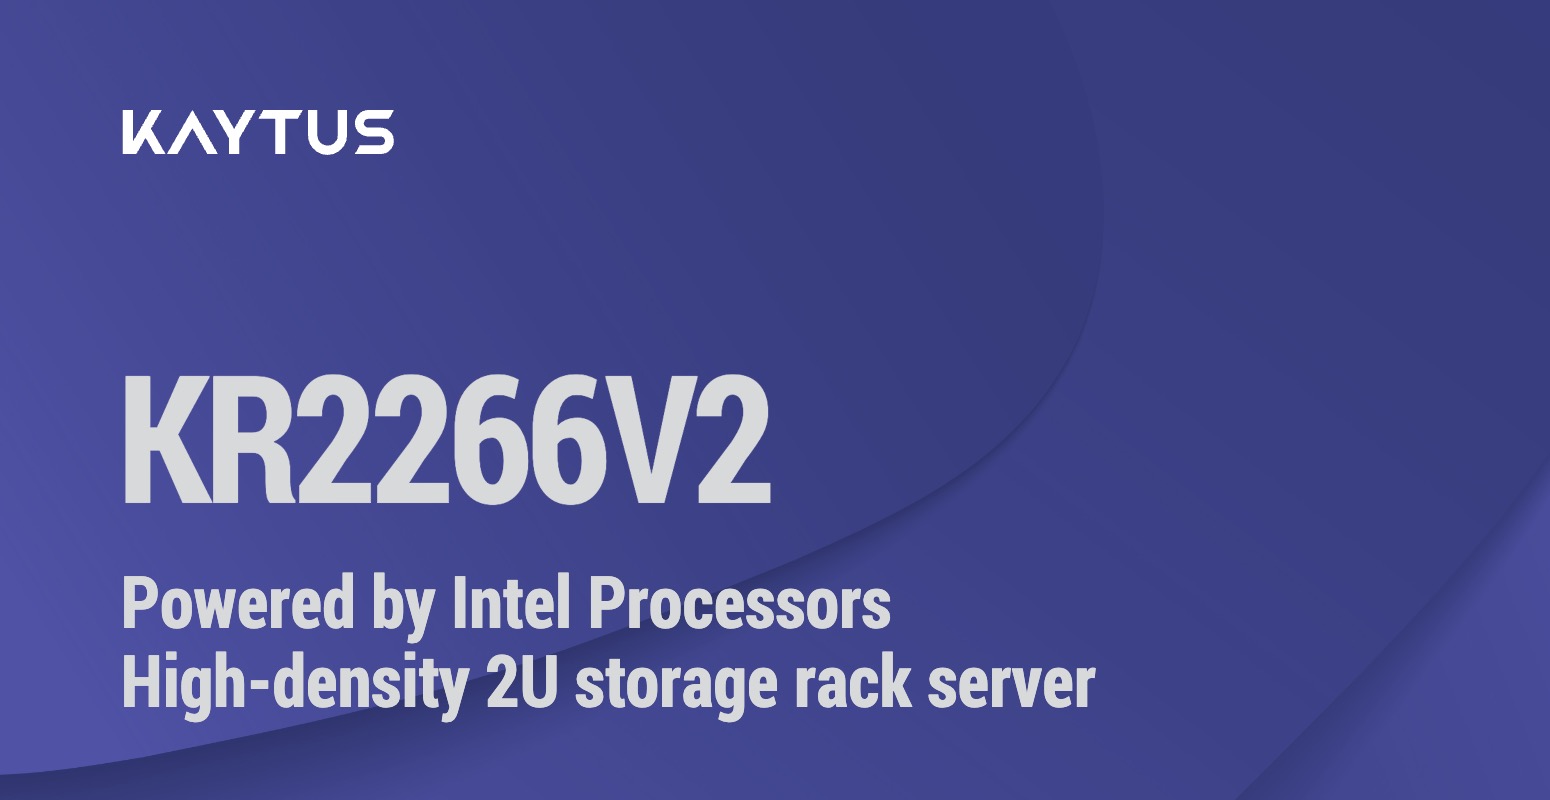 Accommodating 24+4 LFF Drives in a 2U Space: KAYTUS KR2266V2 Server Significantly Increases Storage Density